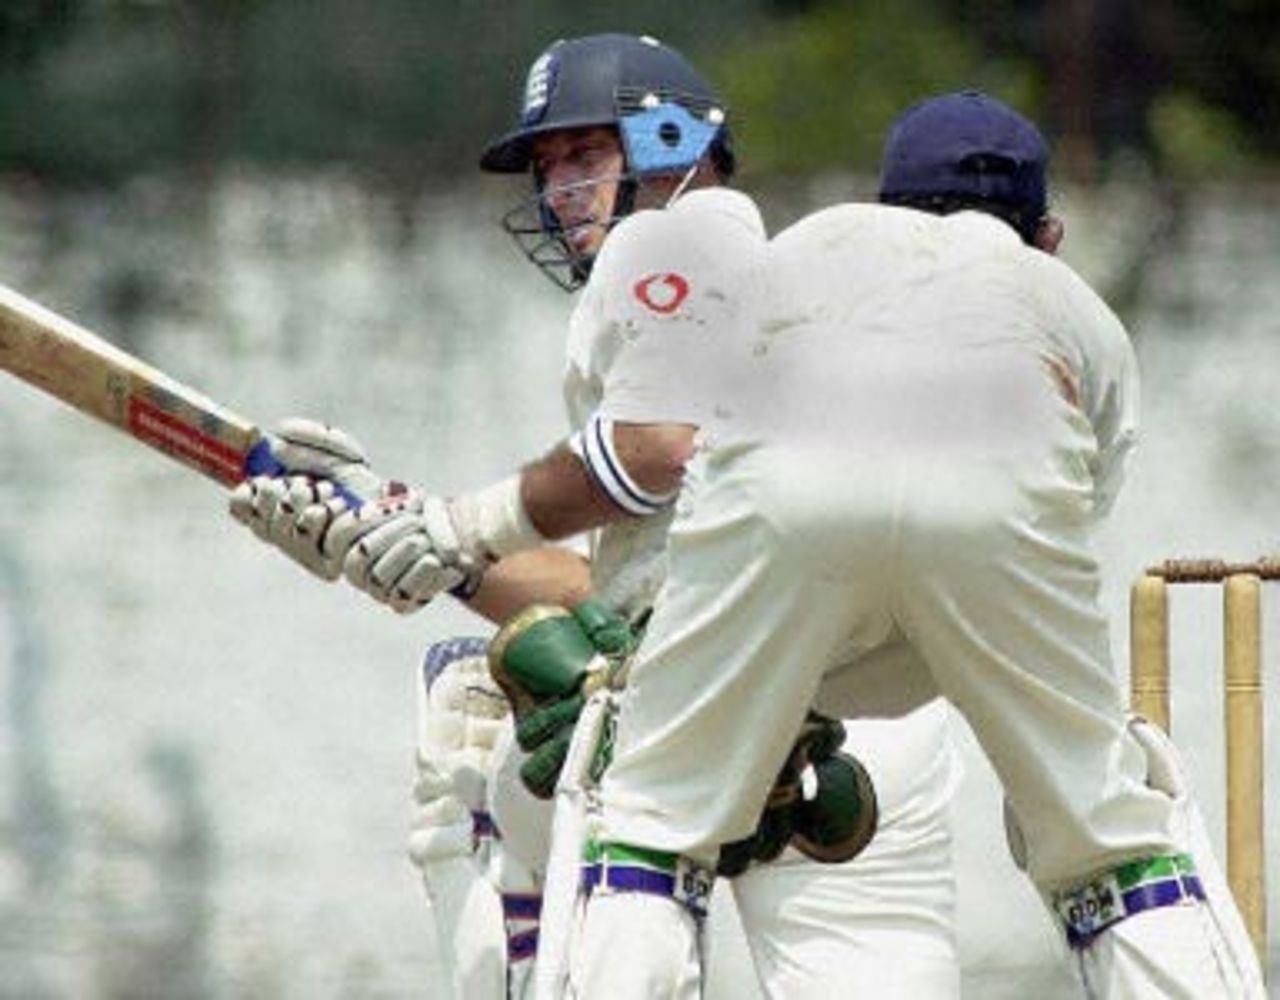 England's captain Nasser Hussain bats 08 February 2001 in the first day of the second practice match against a Sri Lanka Board President's XI as wicketkeeper Prasanna Jayawardena (back to the camera) looks on. England is due to play three Tests and three one-day internationals against the home team in their first tour of Sri Lanka in eight years.